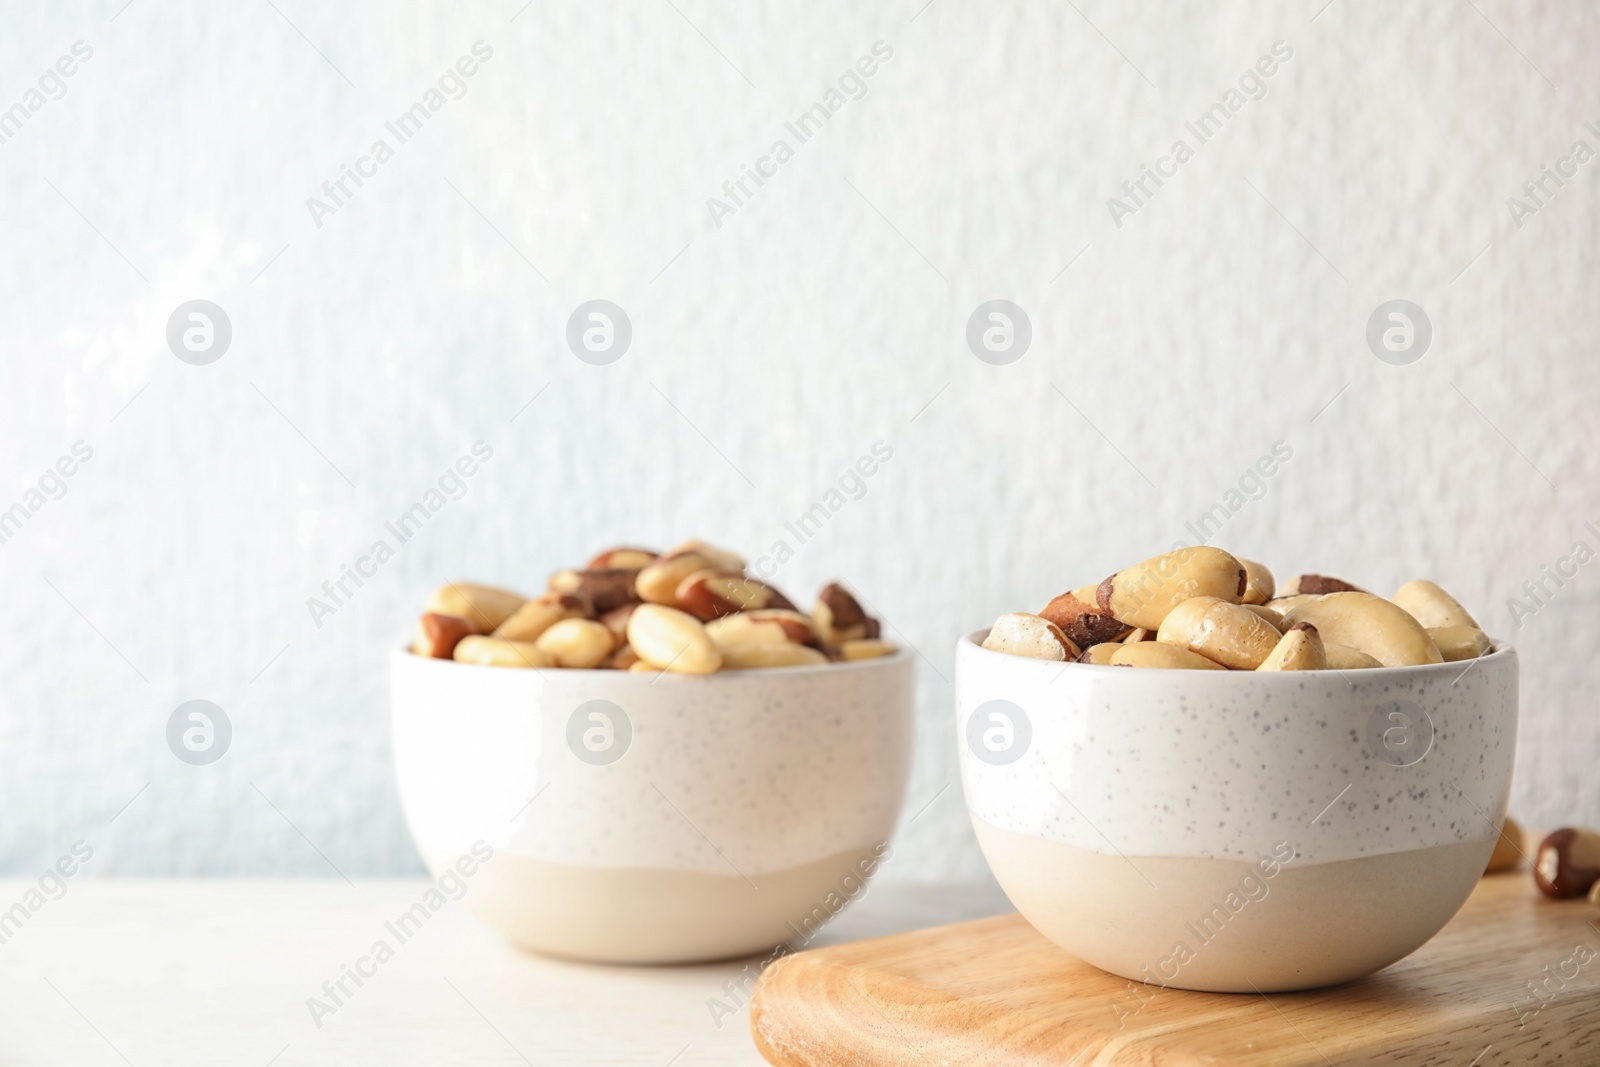 Photo of Bowls with tasty Brazil nuts on table. Space for text